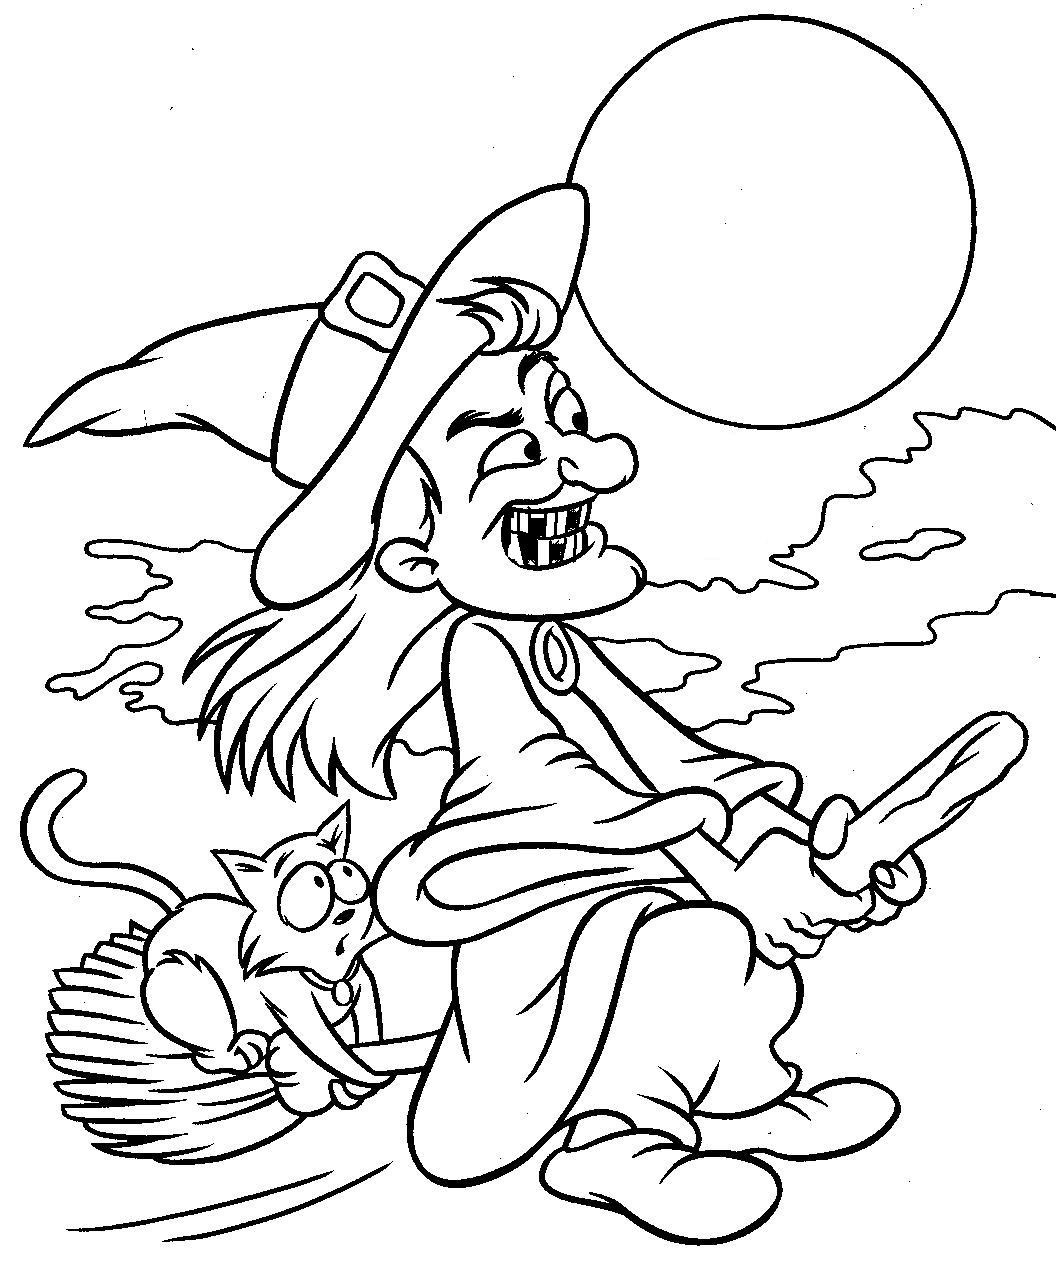 Halloween Coloring Pages For Kids
 Free Halloween coloring pages Halloween Coloring Pages